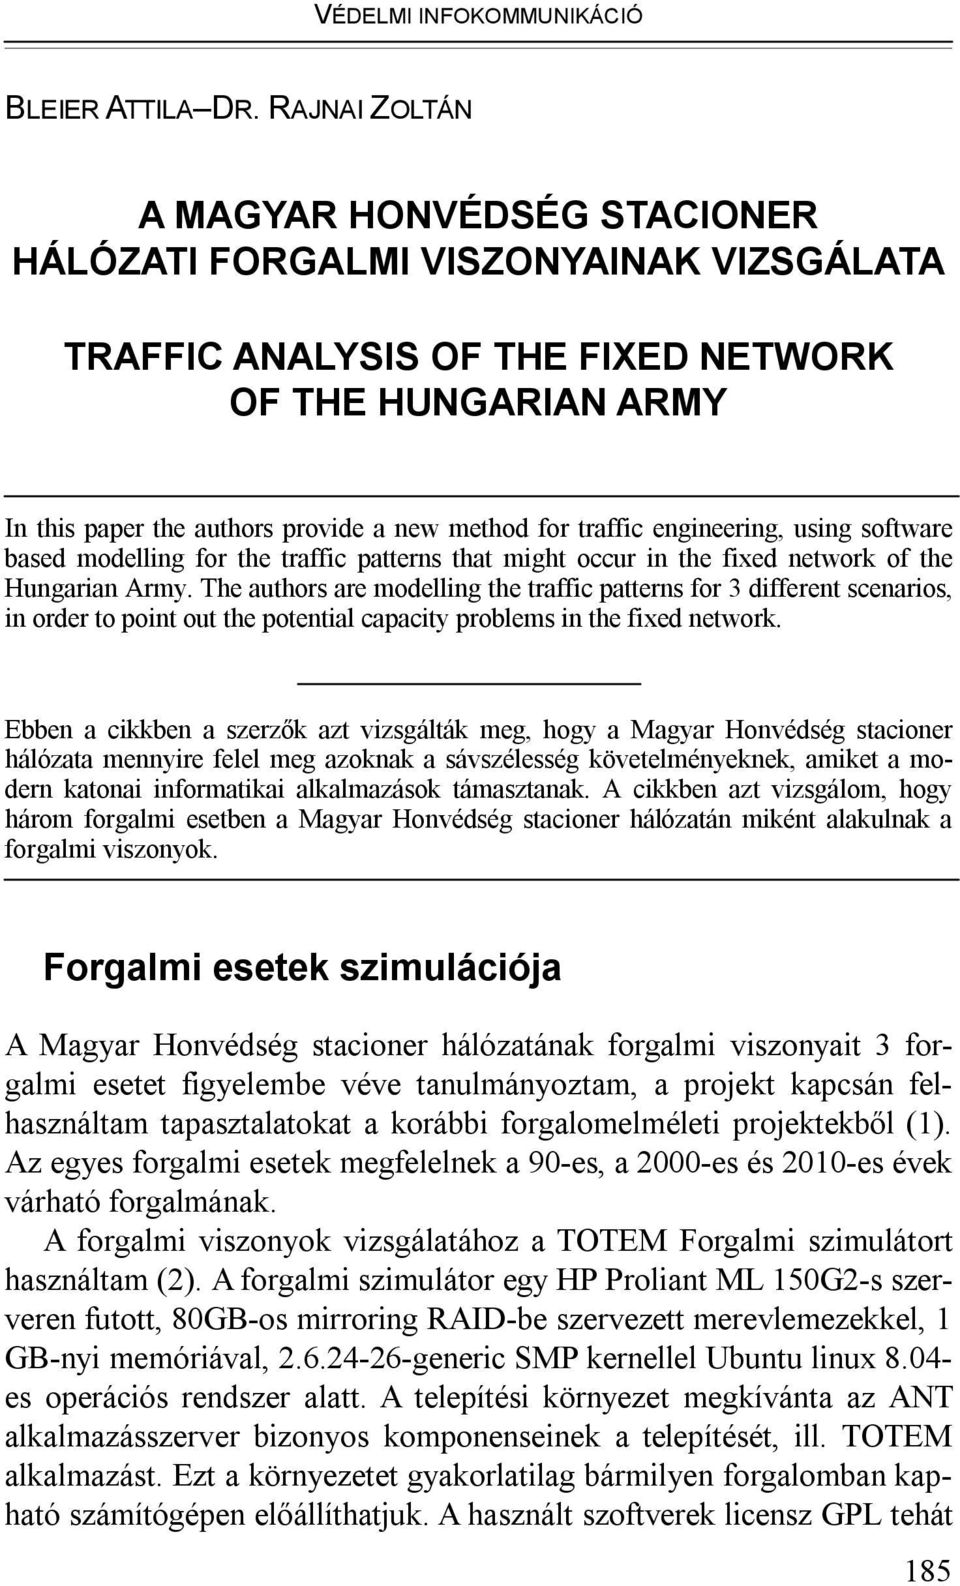 traffic engineering, using software based modelling for the traffic patterns that might occur in the fixed network of the Hungarian Army.